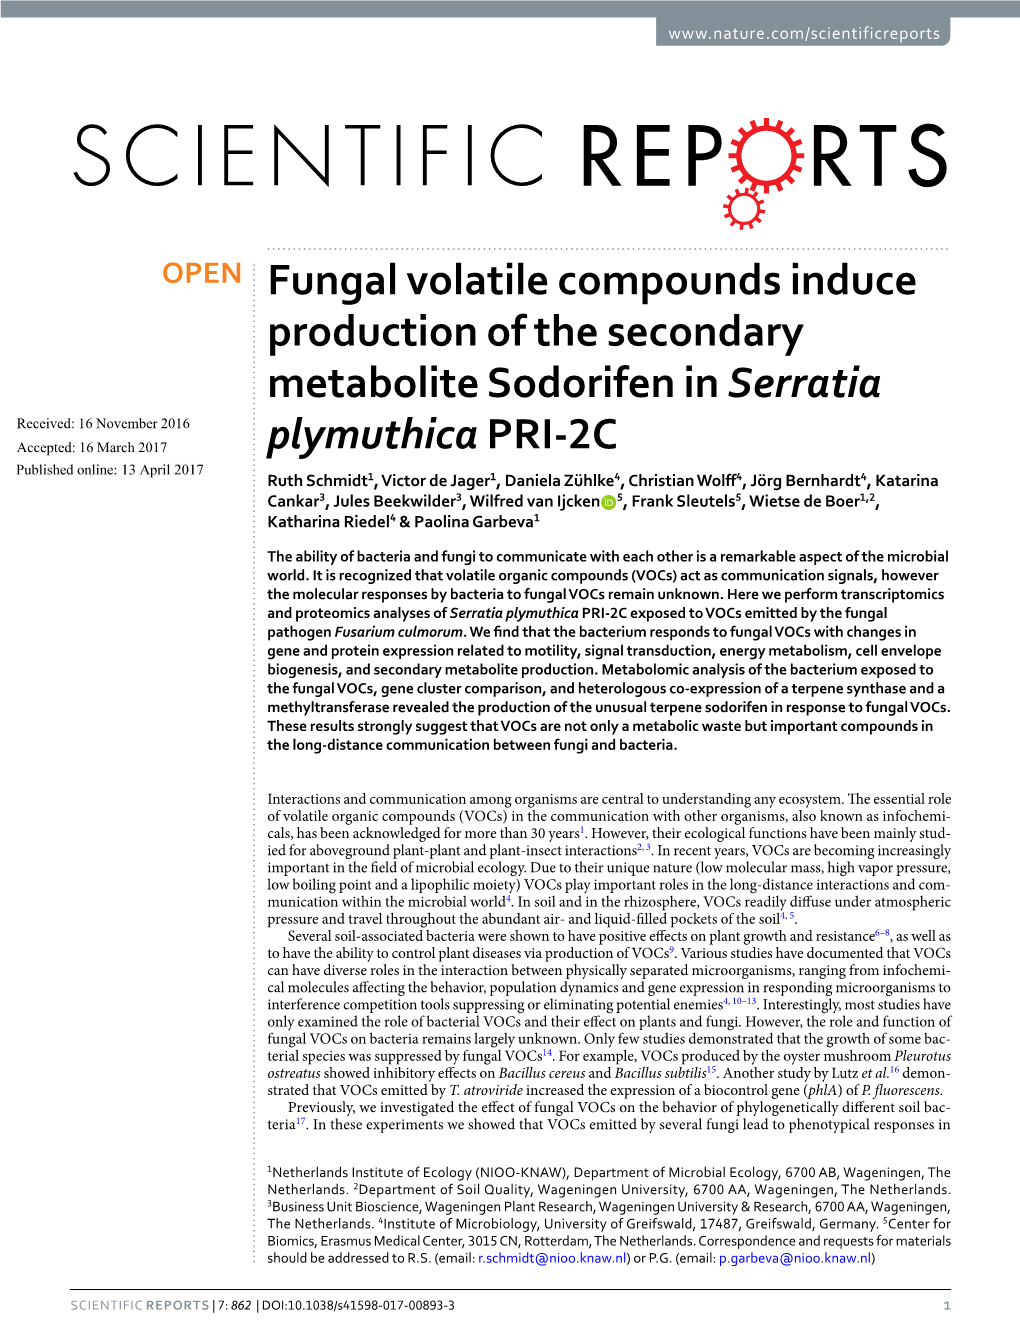 Fungal Volatile Compounds Induce Production of the Secondary